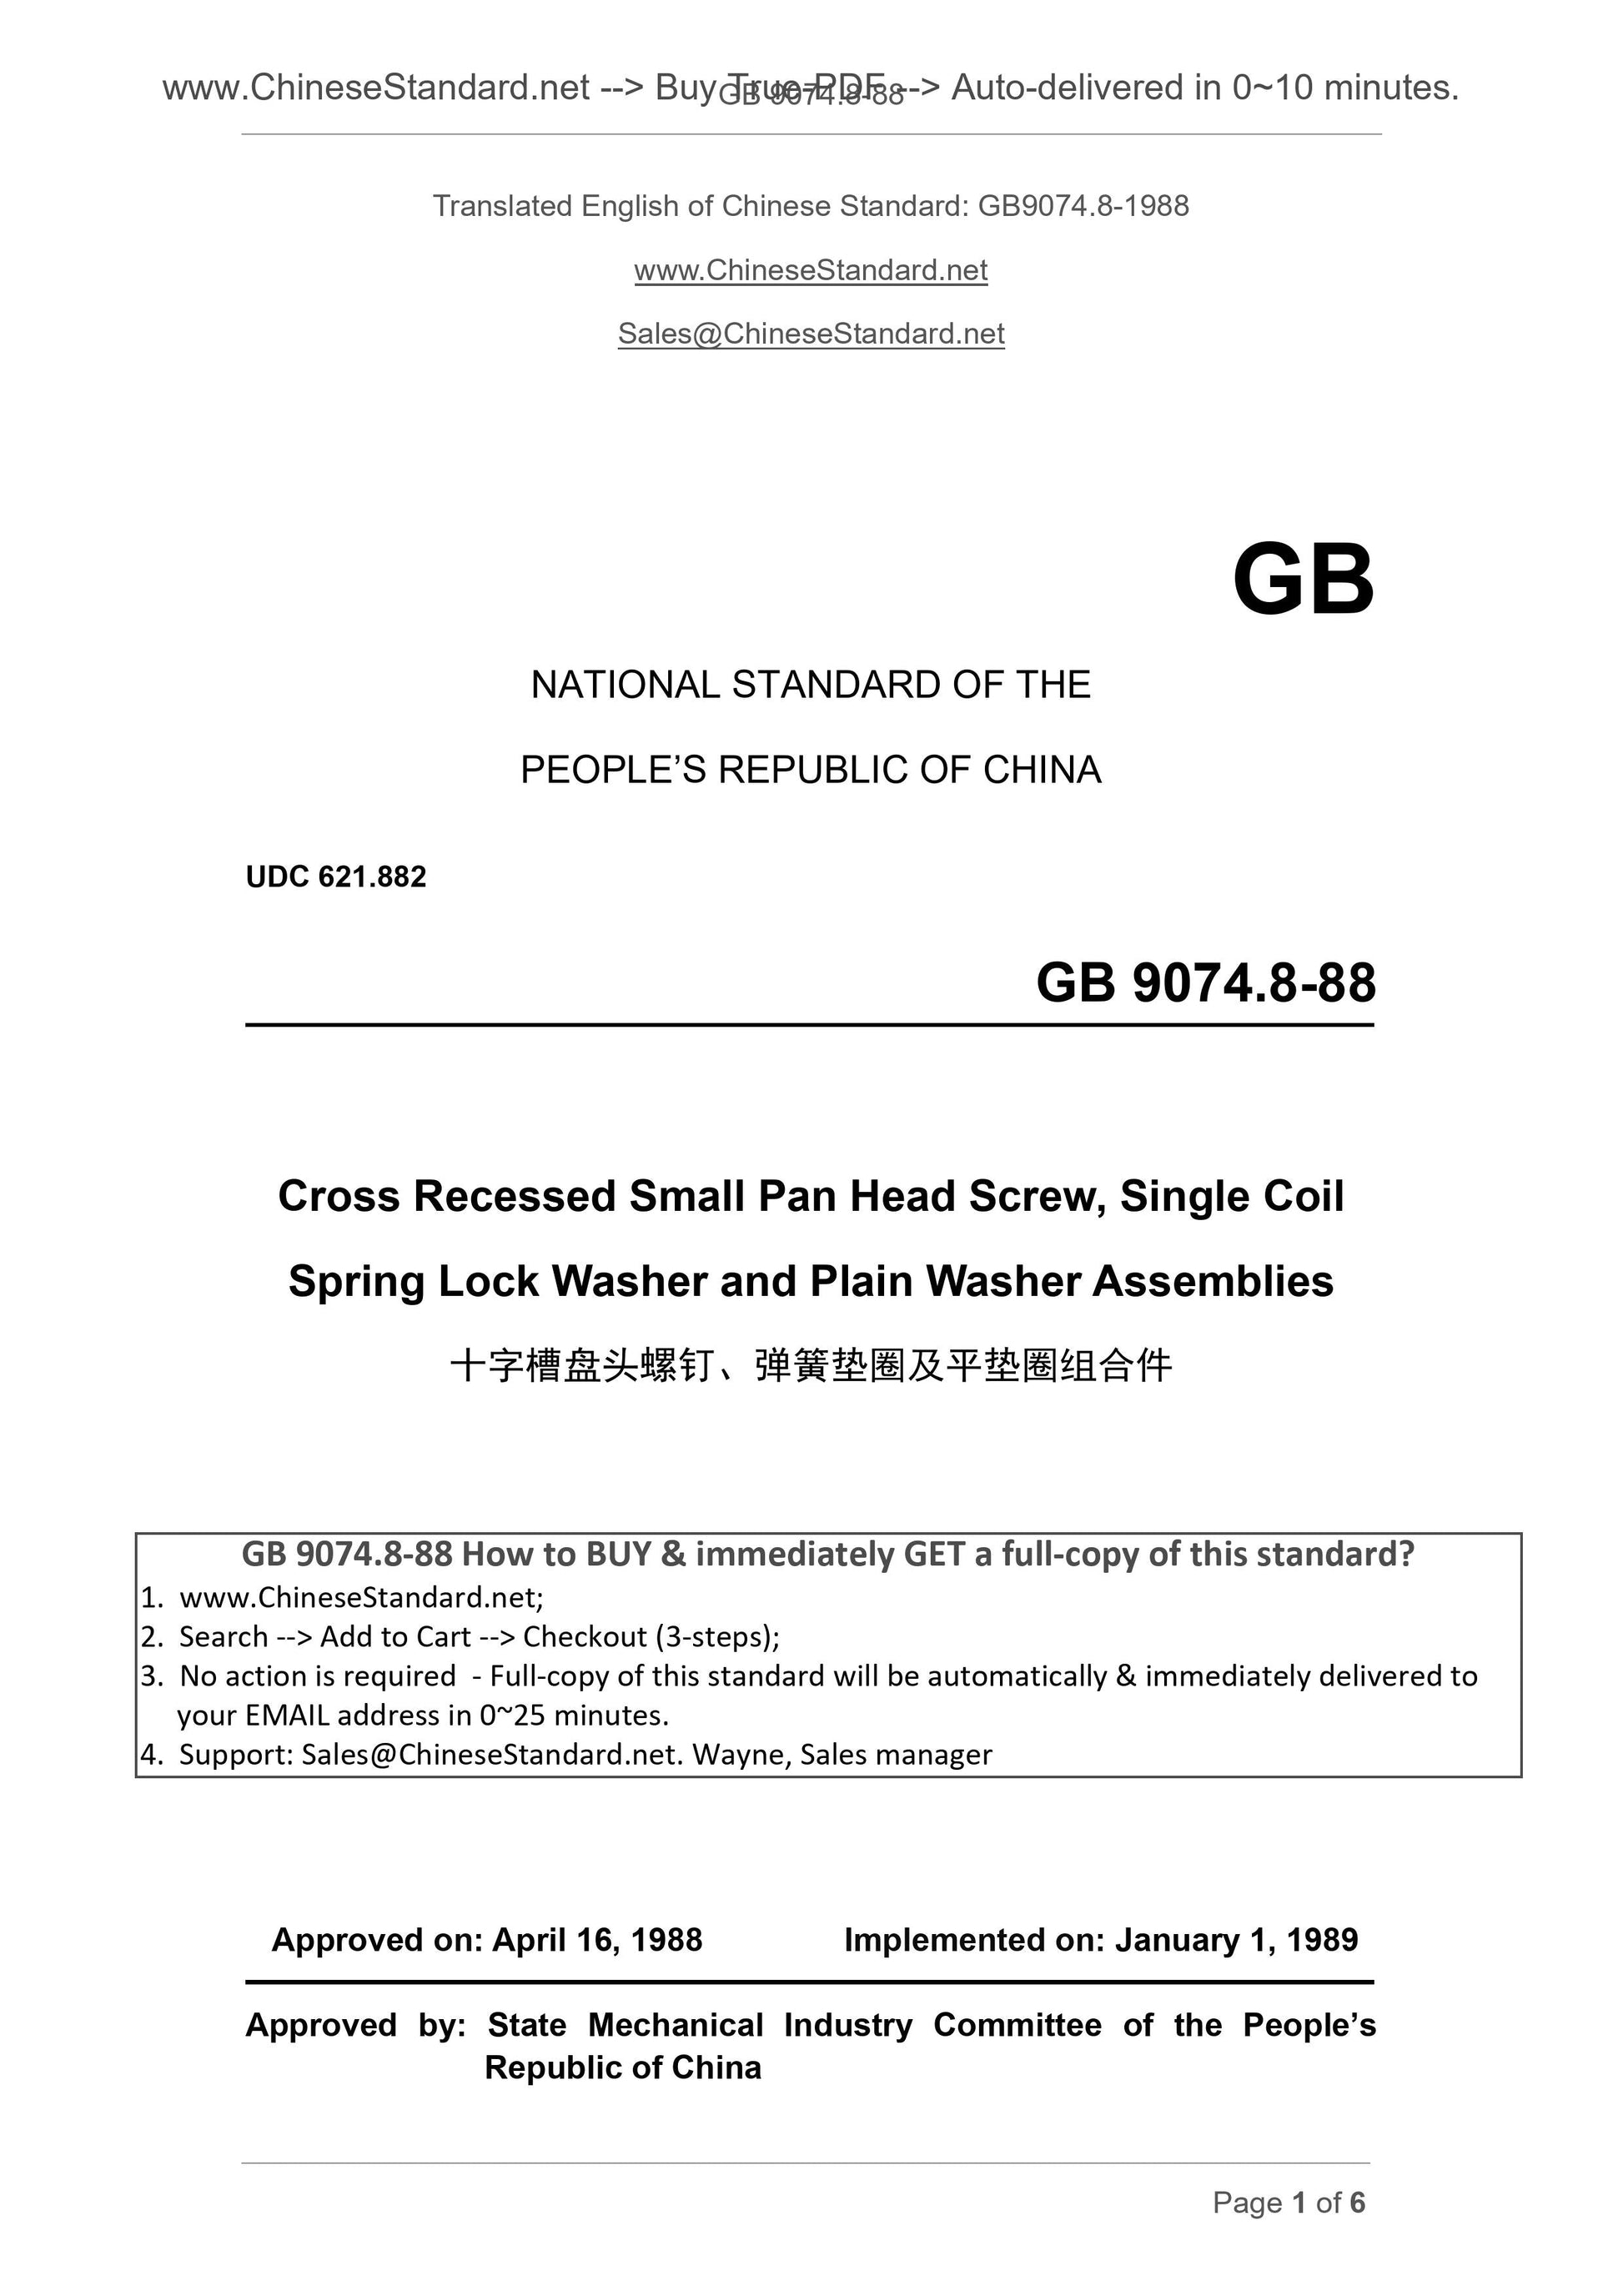 GB/T 9074.8-1988 Page 1